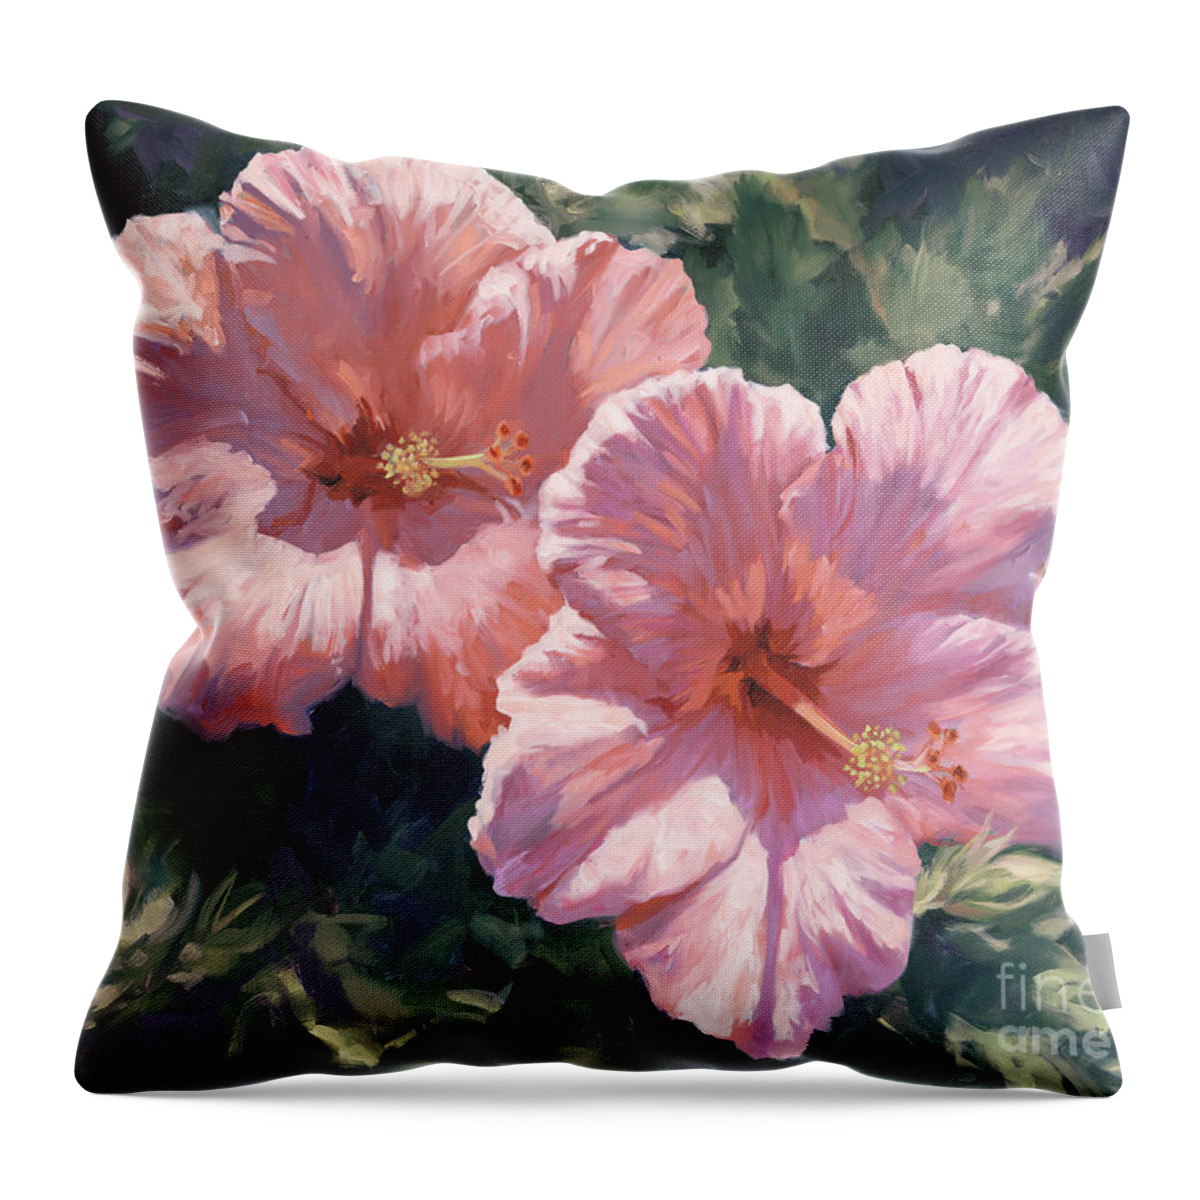 Pink Hibiscus Throw Pillow featuring the painting Pink Hibiscus by Laurie Snow Hein